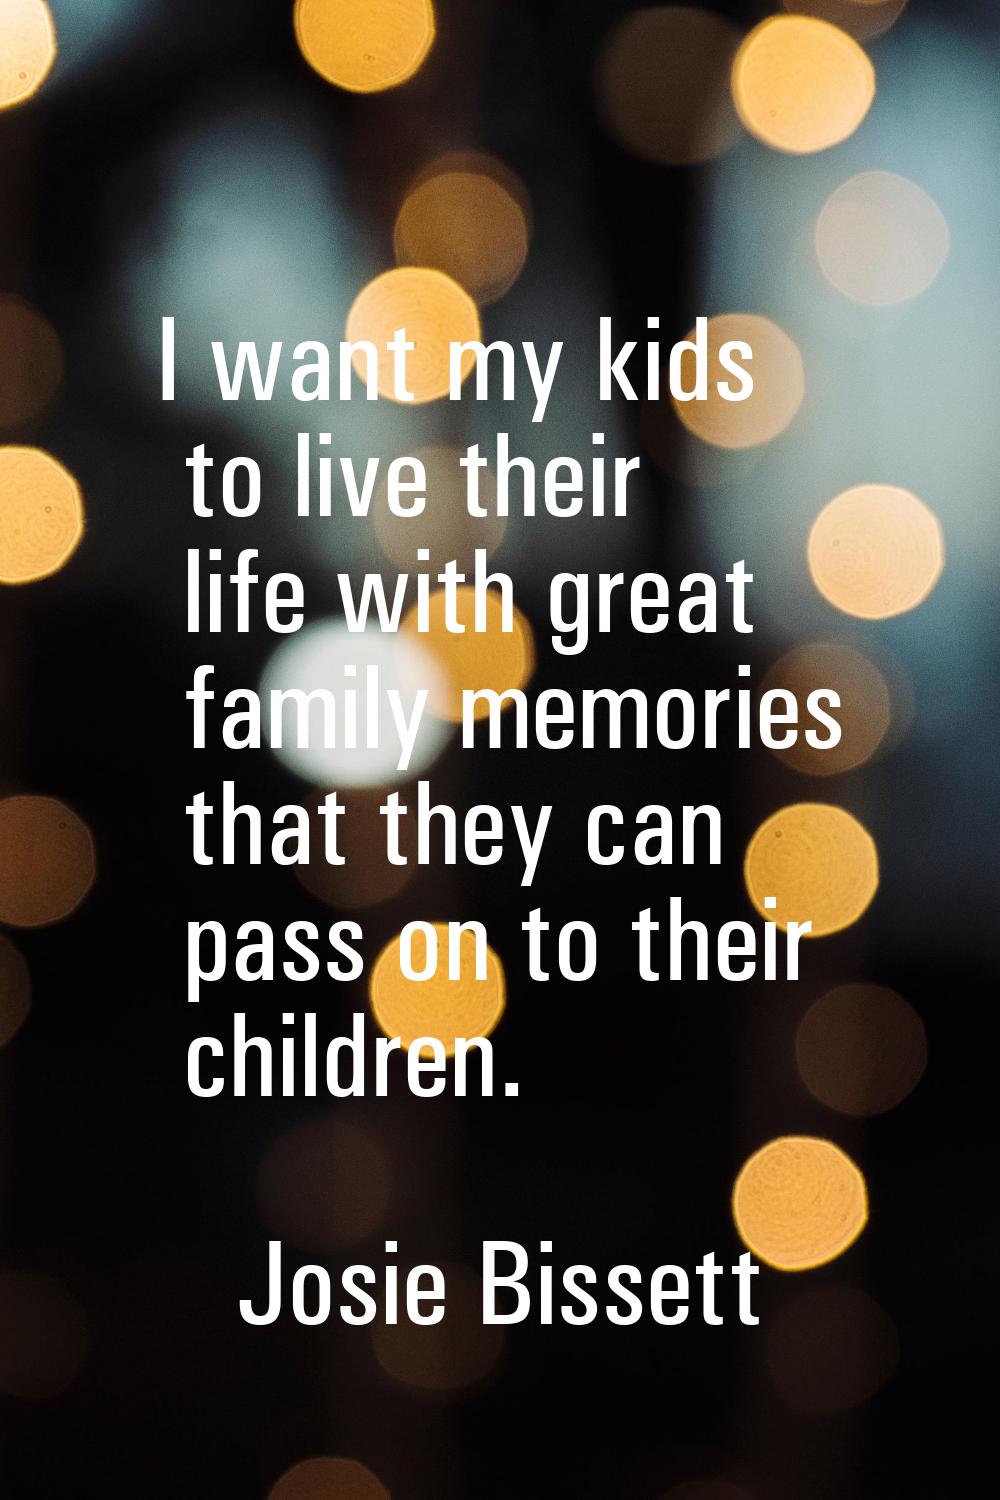 I want my kids to live their life with great family memories that they can pass on to their childre